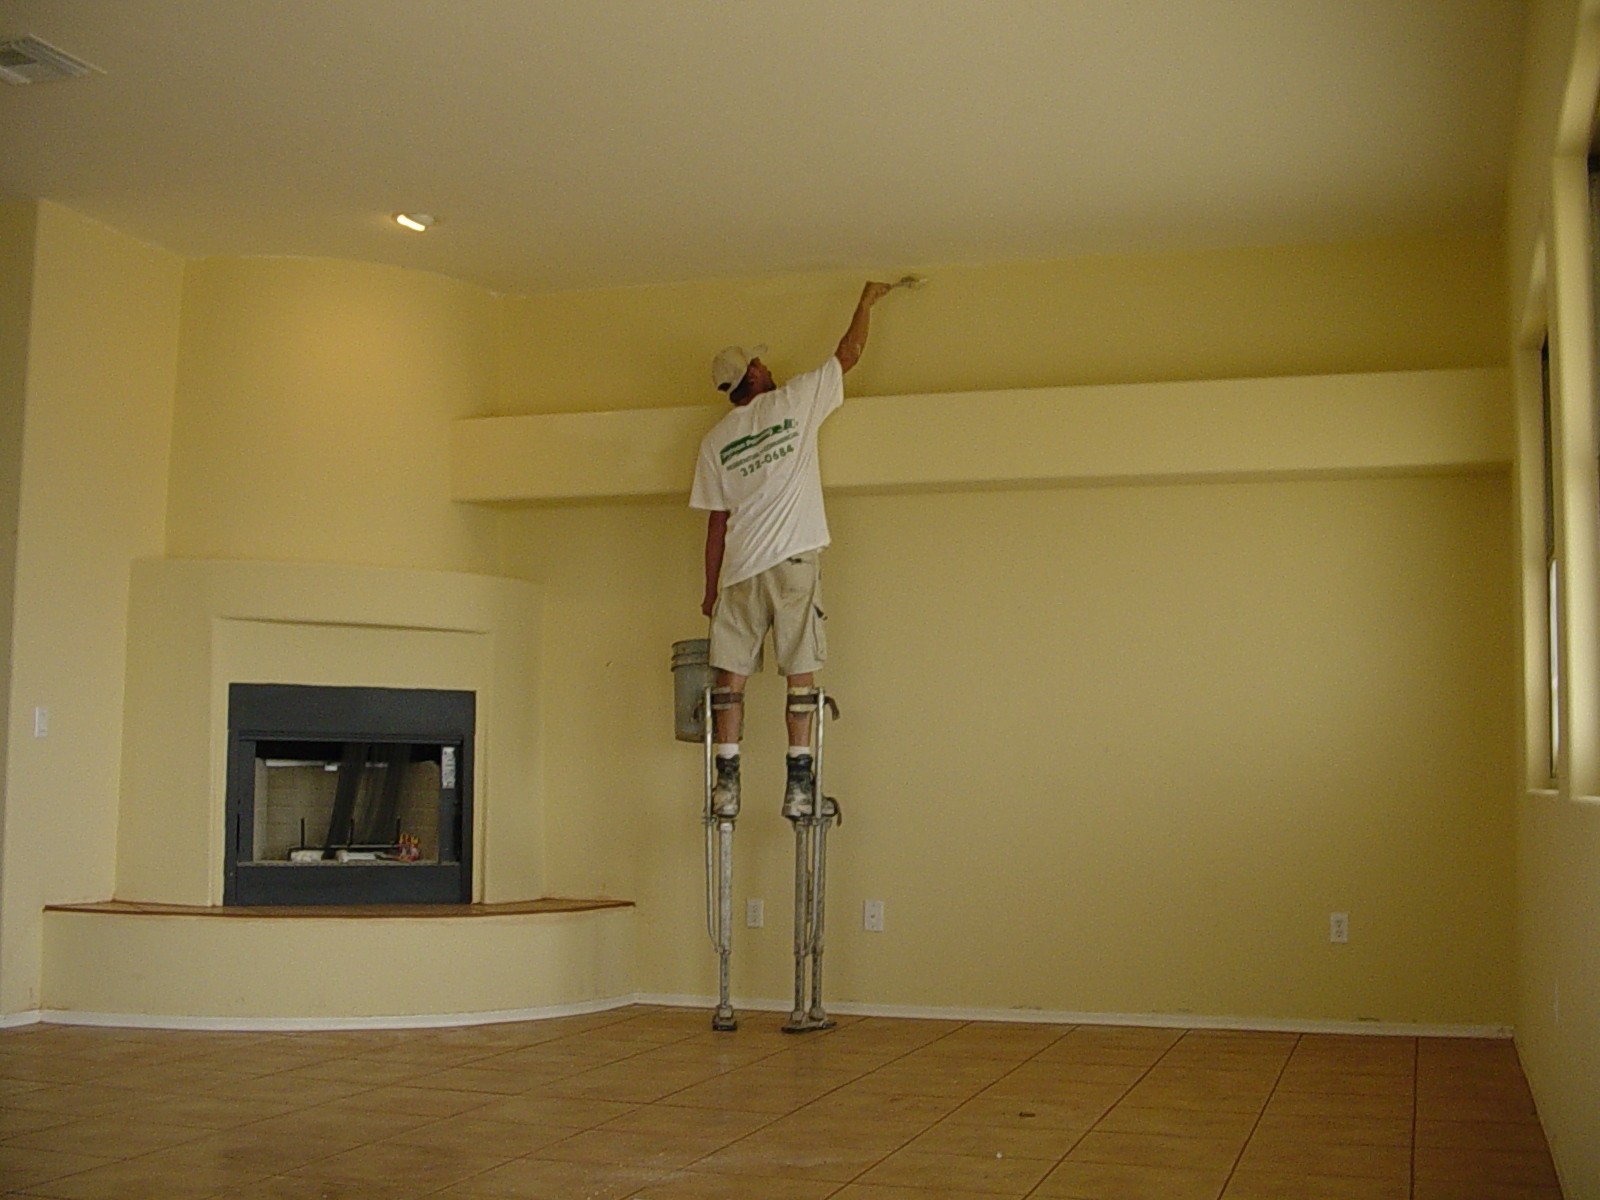 Residential Painting-Cypress TX Professional Painting Contractors-We offer Residential & Commercial Painting, Interior Painting, Exterior Painting, Primer Painting, Industrial Painting, Professional Painters, Institutional Painters, and more.